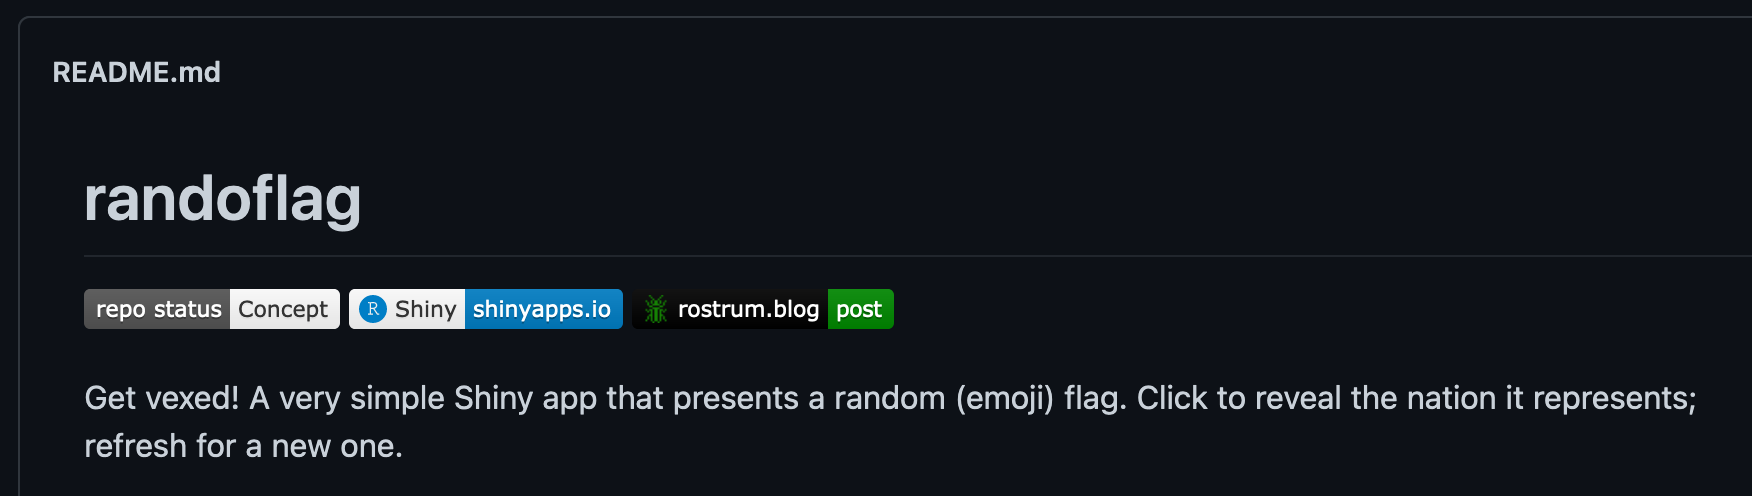 A GitHub repo showing some README badge, including one that has an RStudio logo and says 'shiny' on one half and 'shinyapps.io' on the other half.